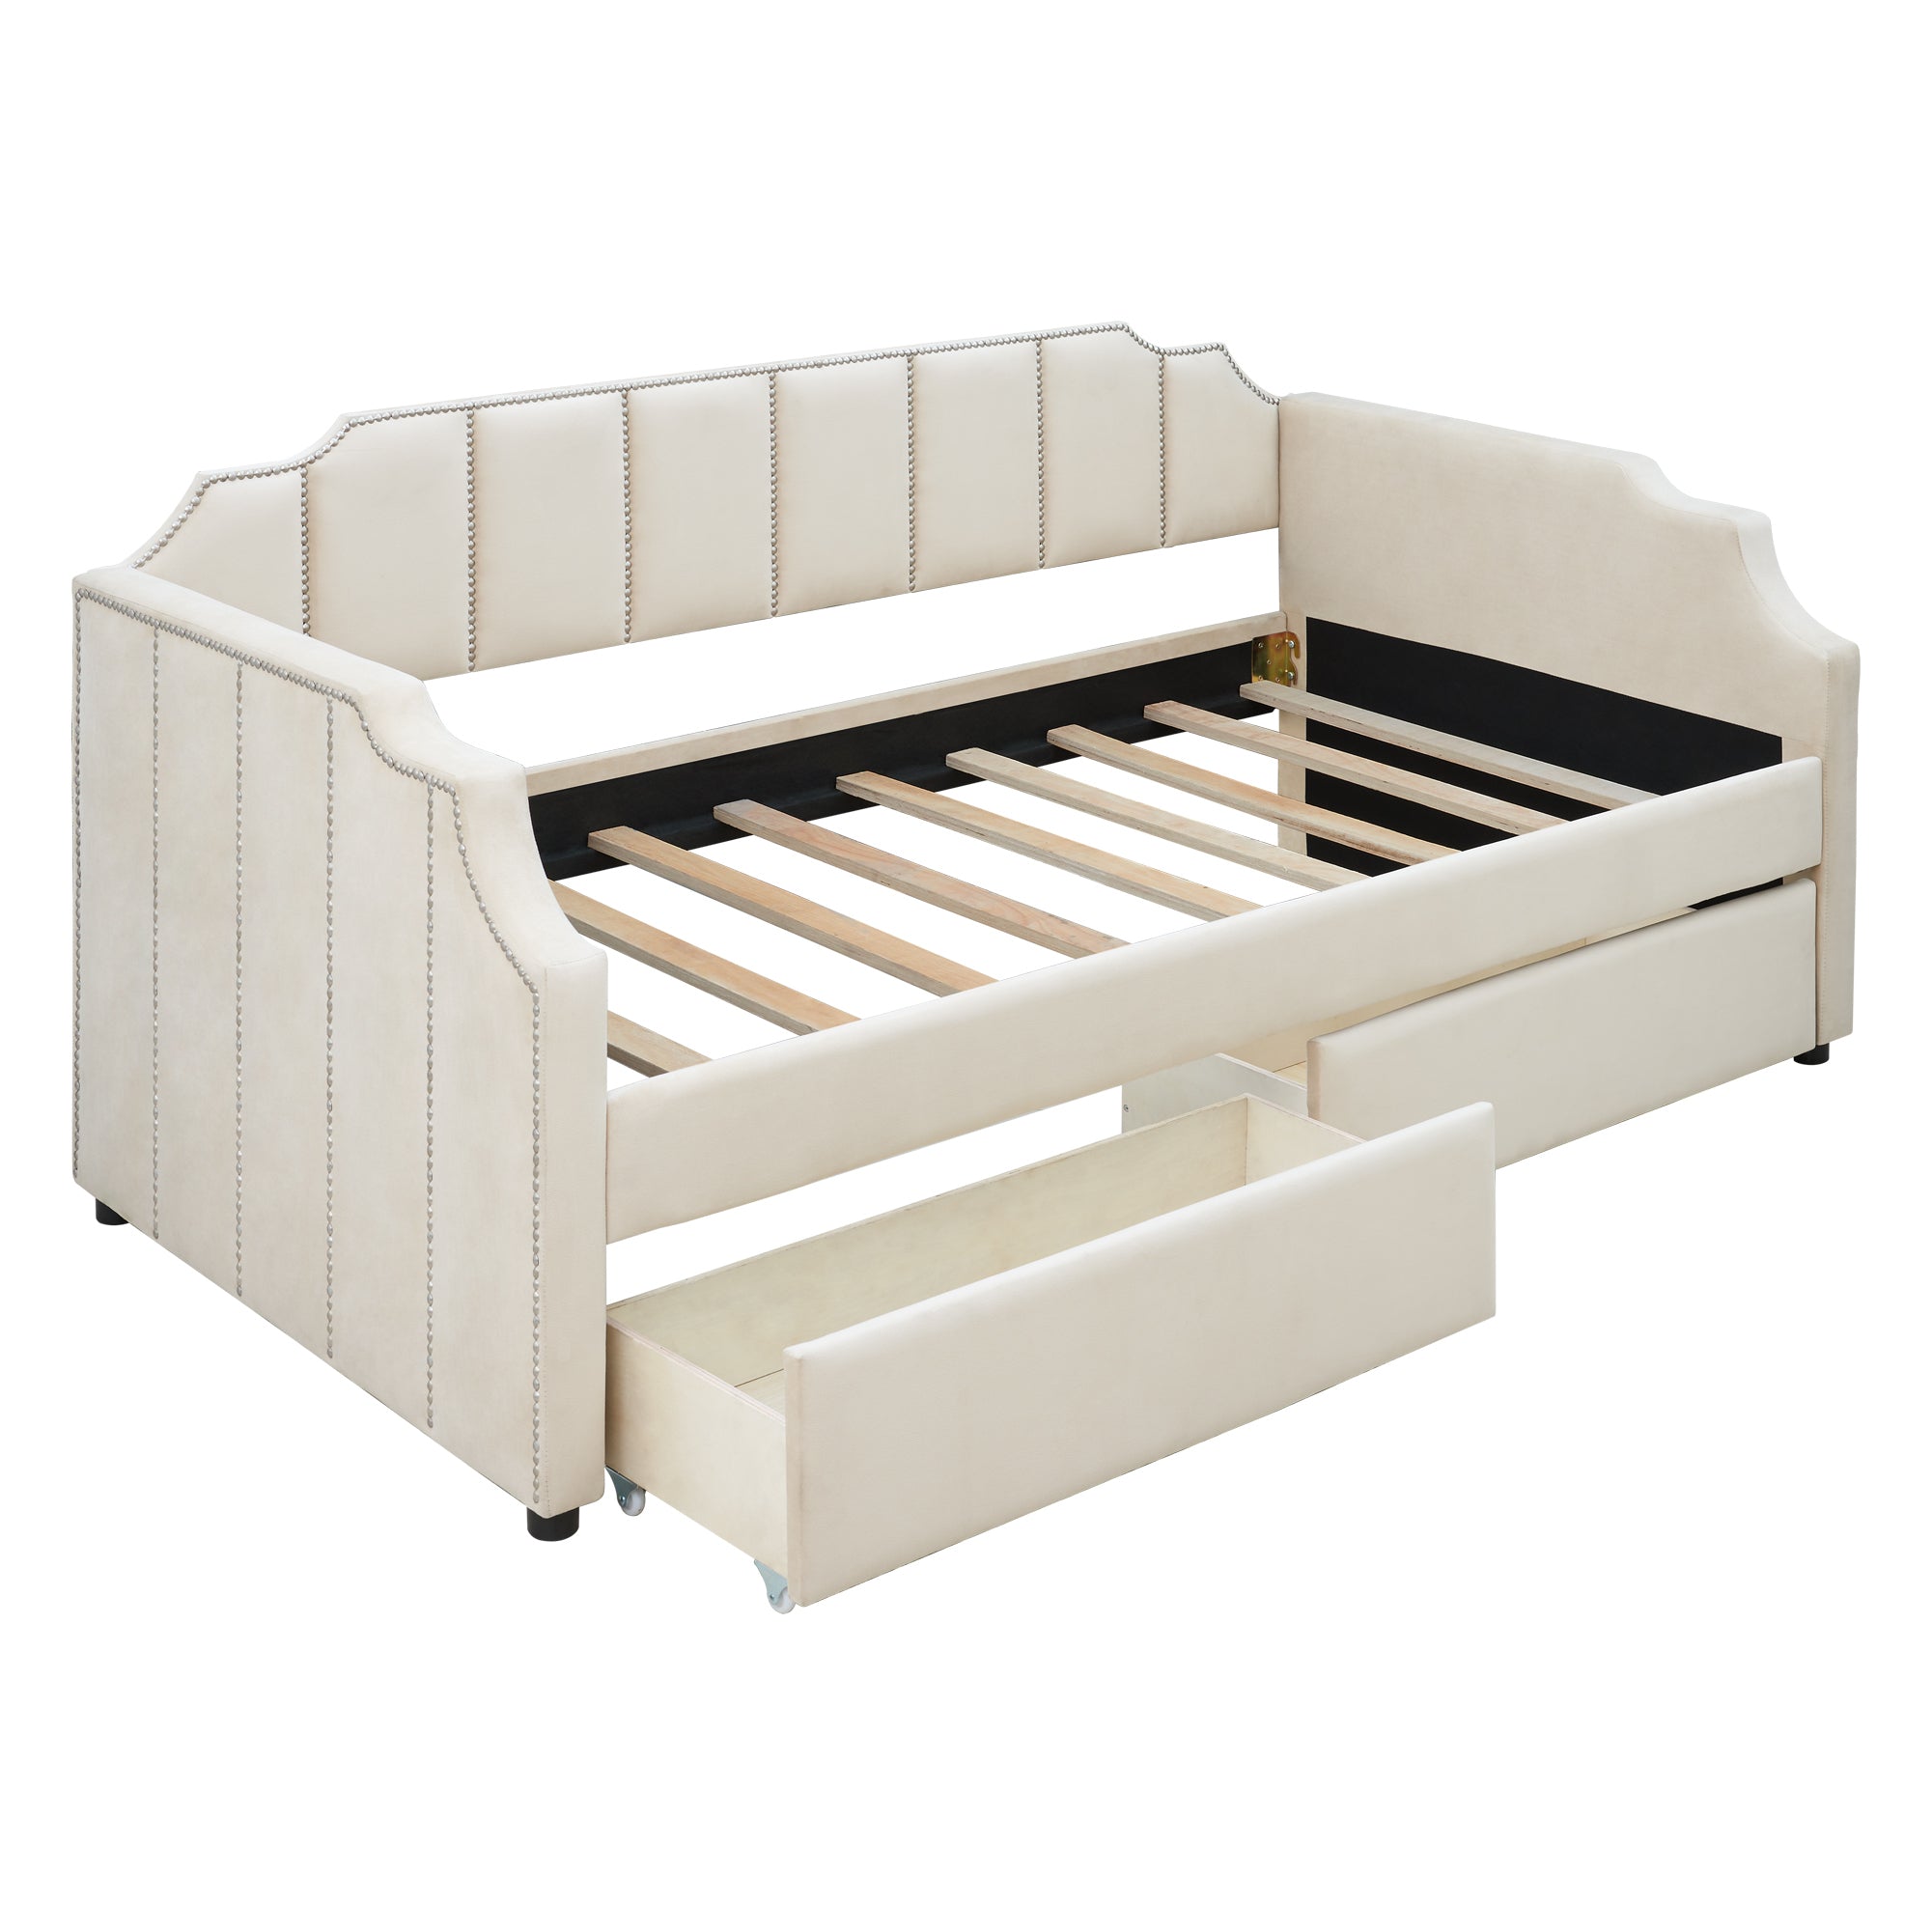 Twin Size Upholstered daybed with Drawers (Beige)